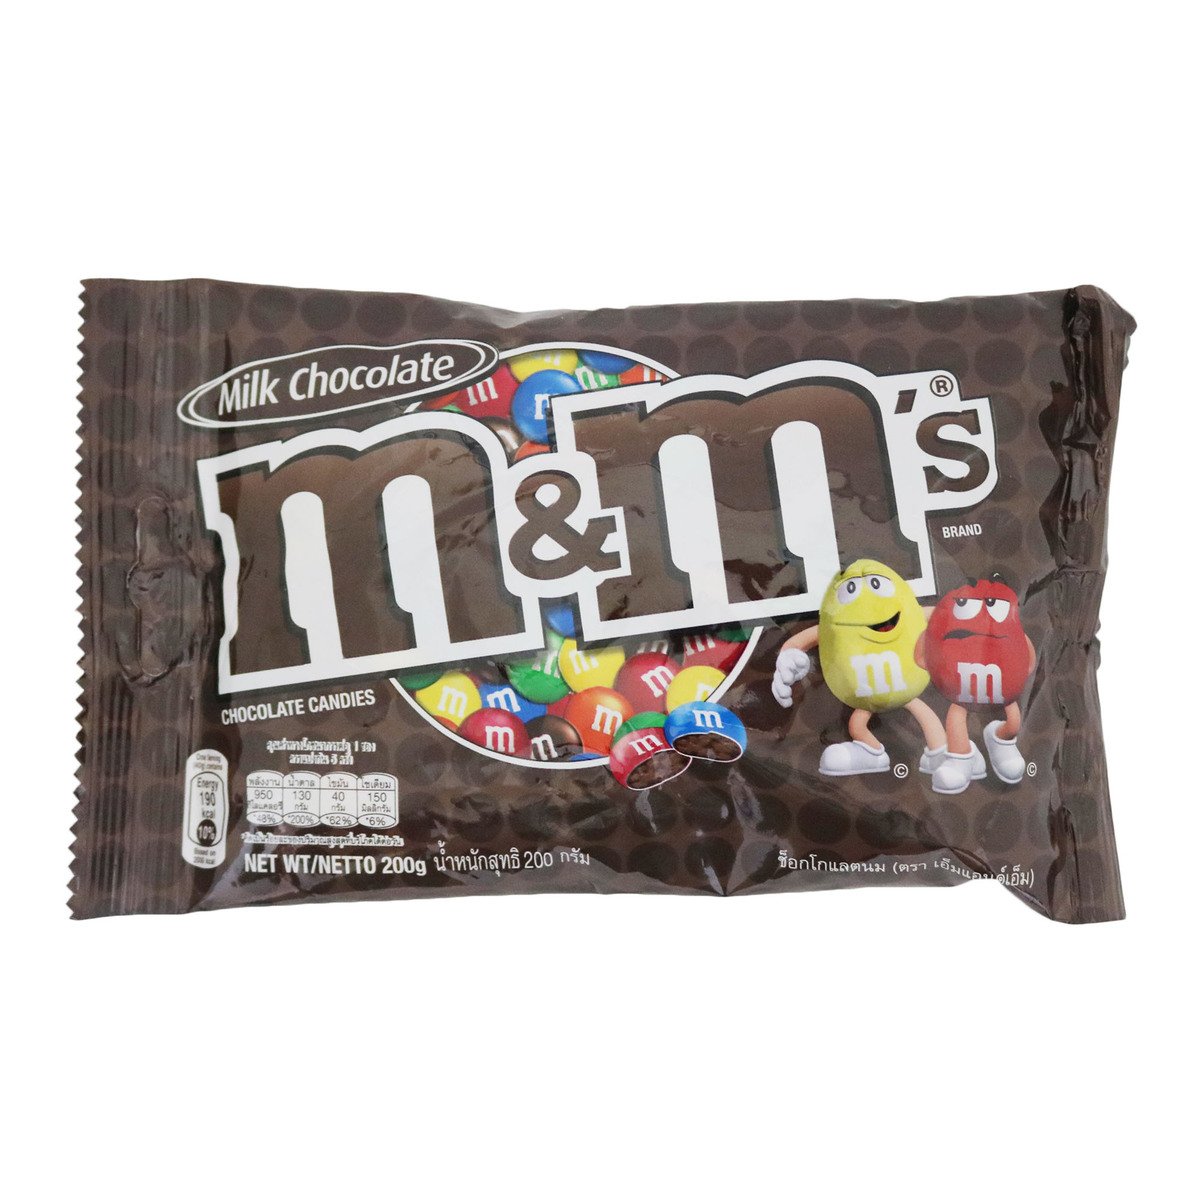 M&M's Online Store, The best prices online in Malaysia